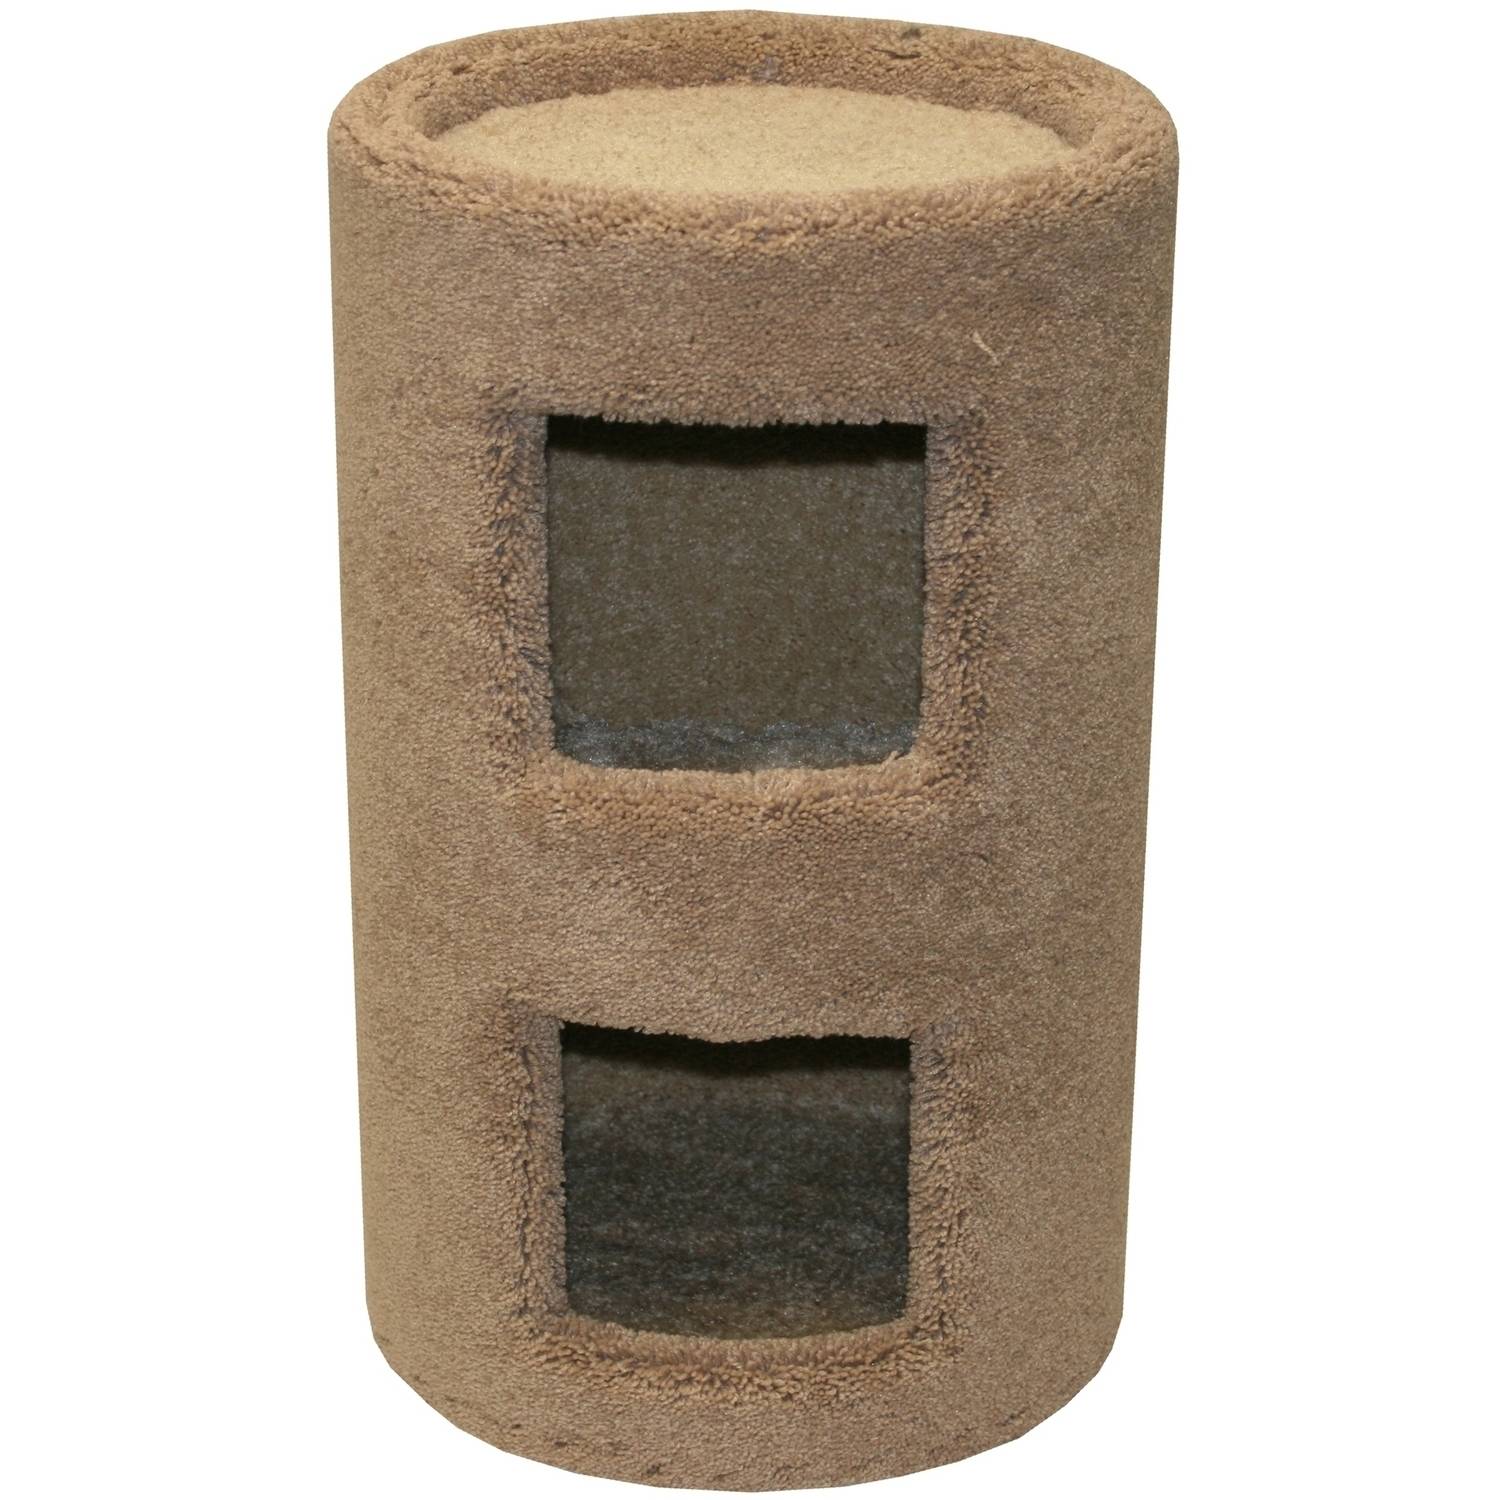 Classy Kitty 75-in Cat Tree & Condo Scratching Post Tower, Beige - image 1 of 5